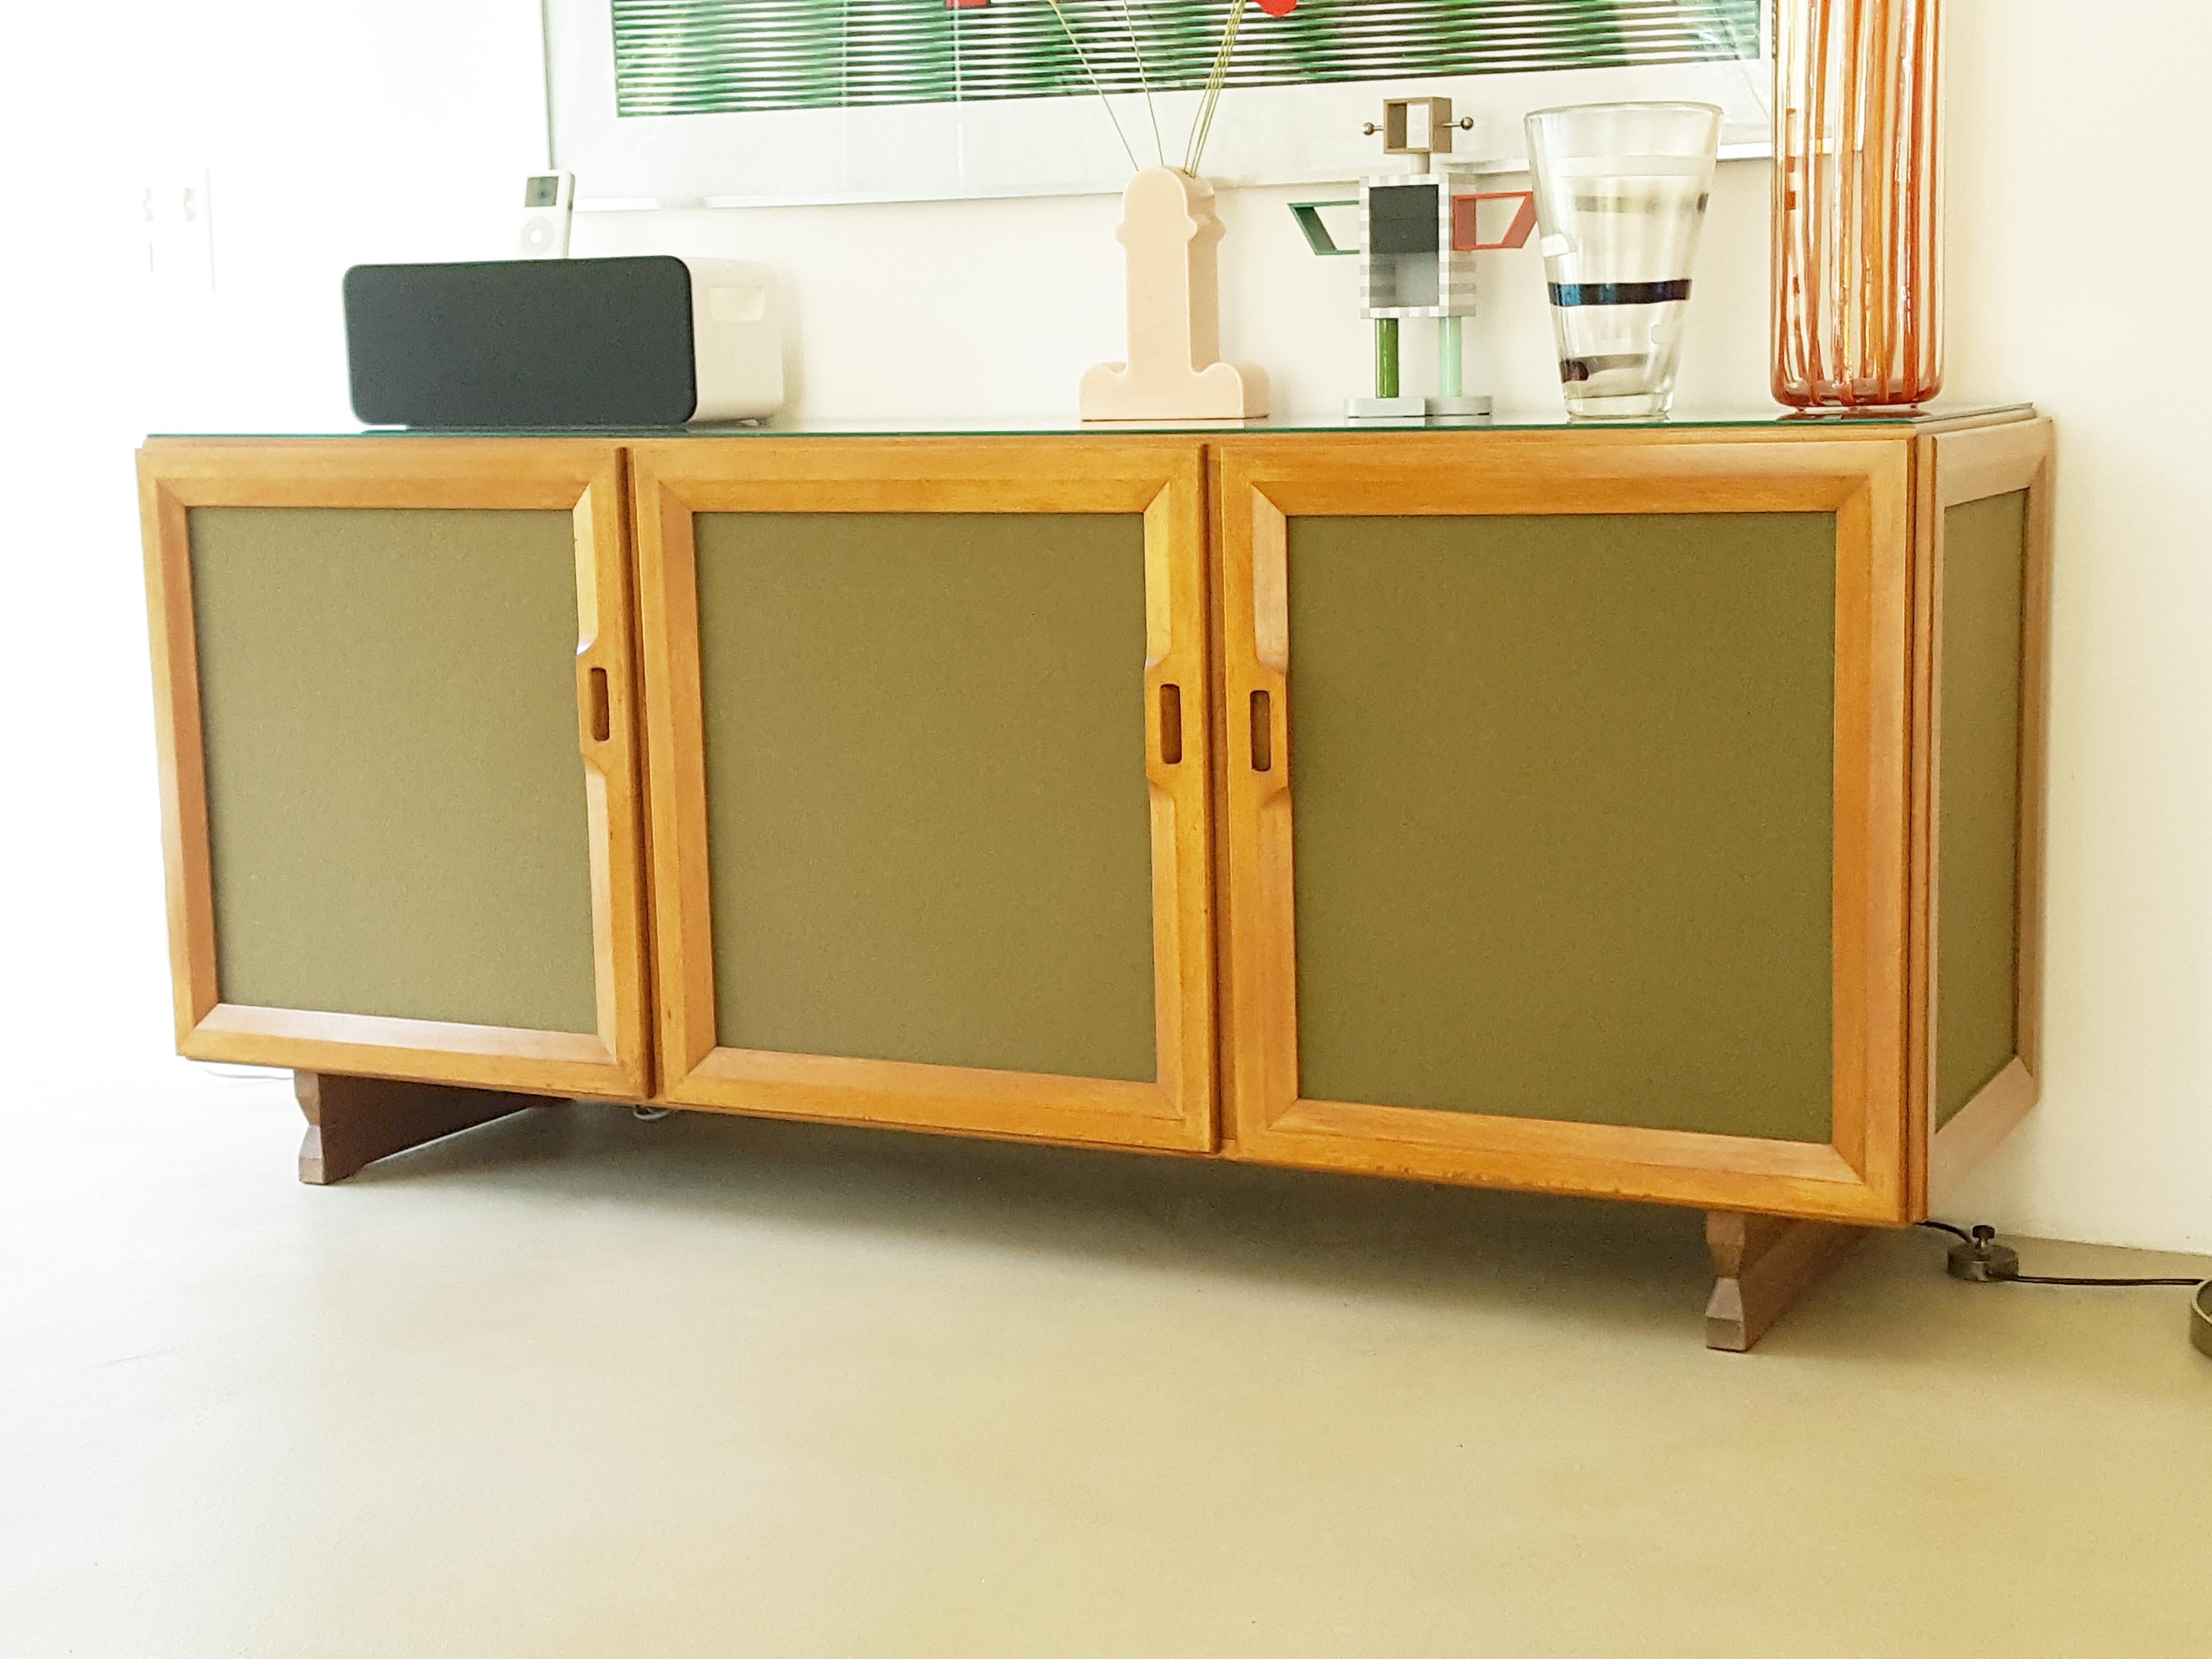 Mid-20th Century Walnut & olive green fabric 1950s MB 15 Sideboard by Albini & Helg for Poggi For Sale